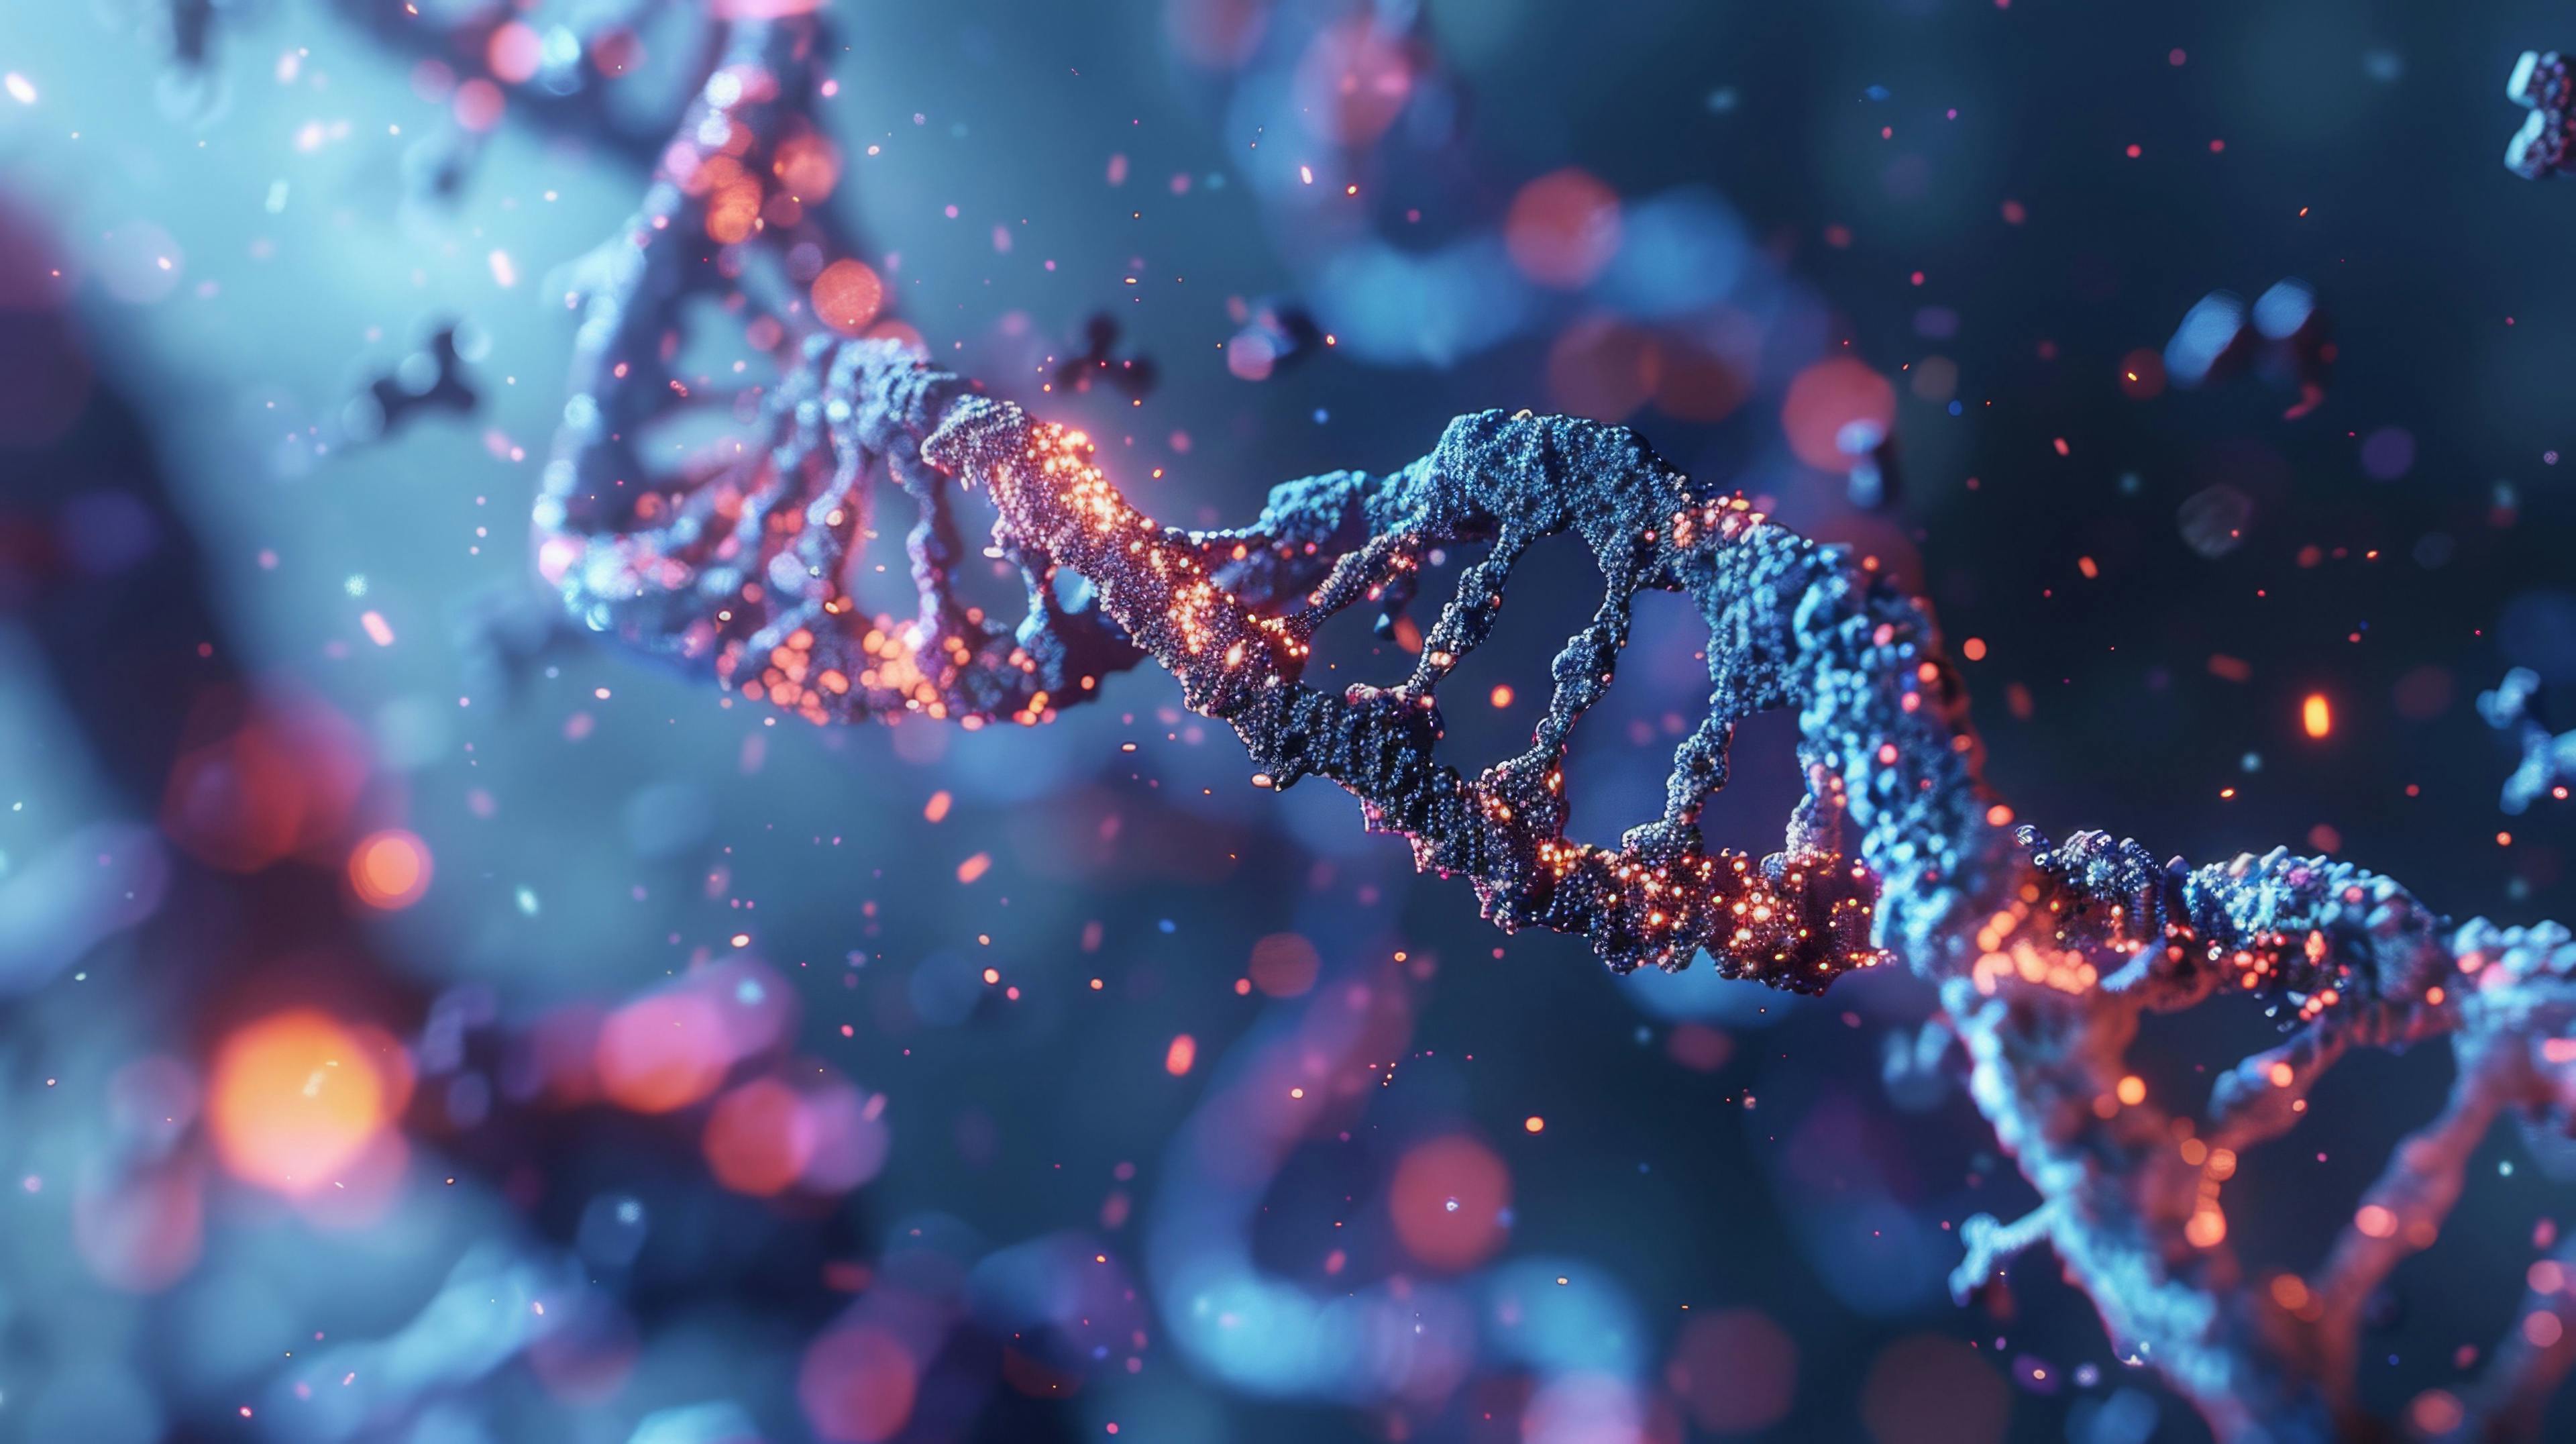 3D rendering image illustrating the process of DNA packaging into chromatin fibers, highlighting the role of histone proteins in regulating gene expression and chromosome condensation. Generated with AI. | Image Credit: © G.Go - stock.adobe.com